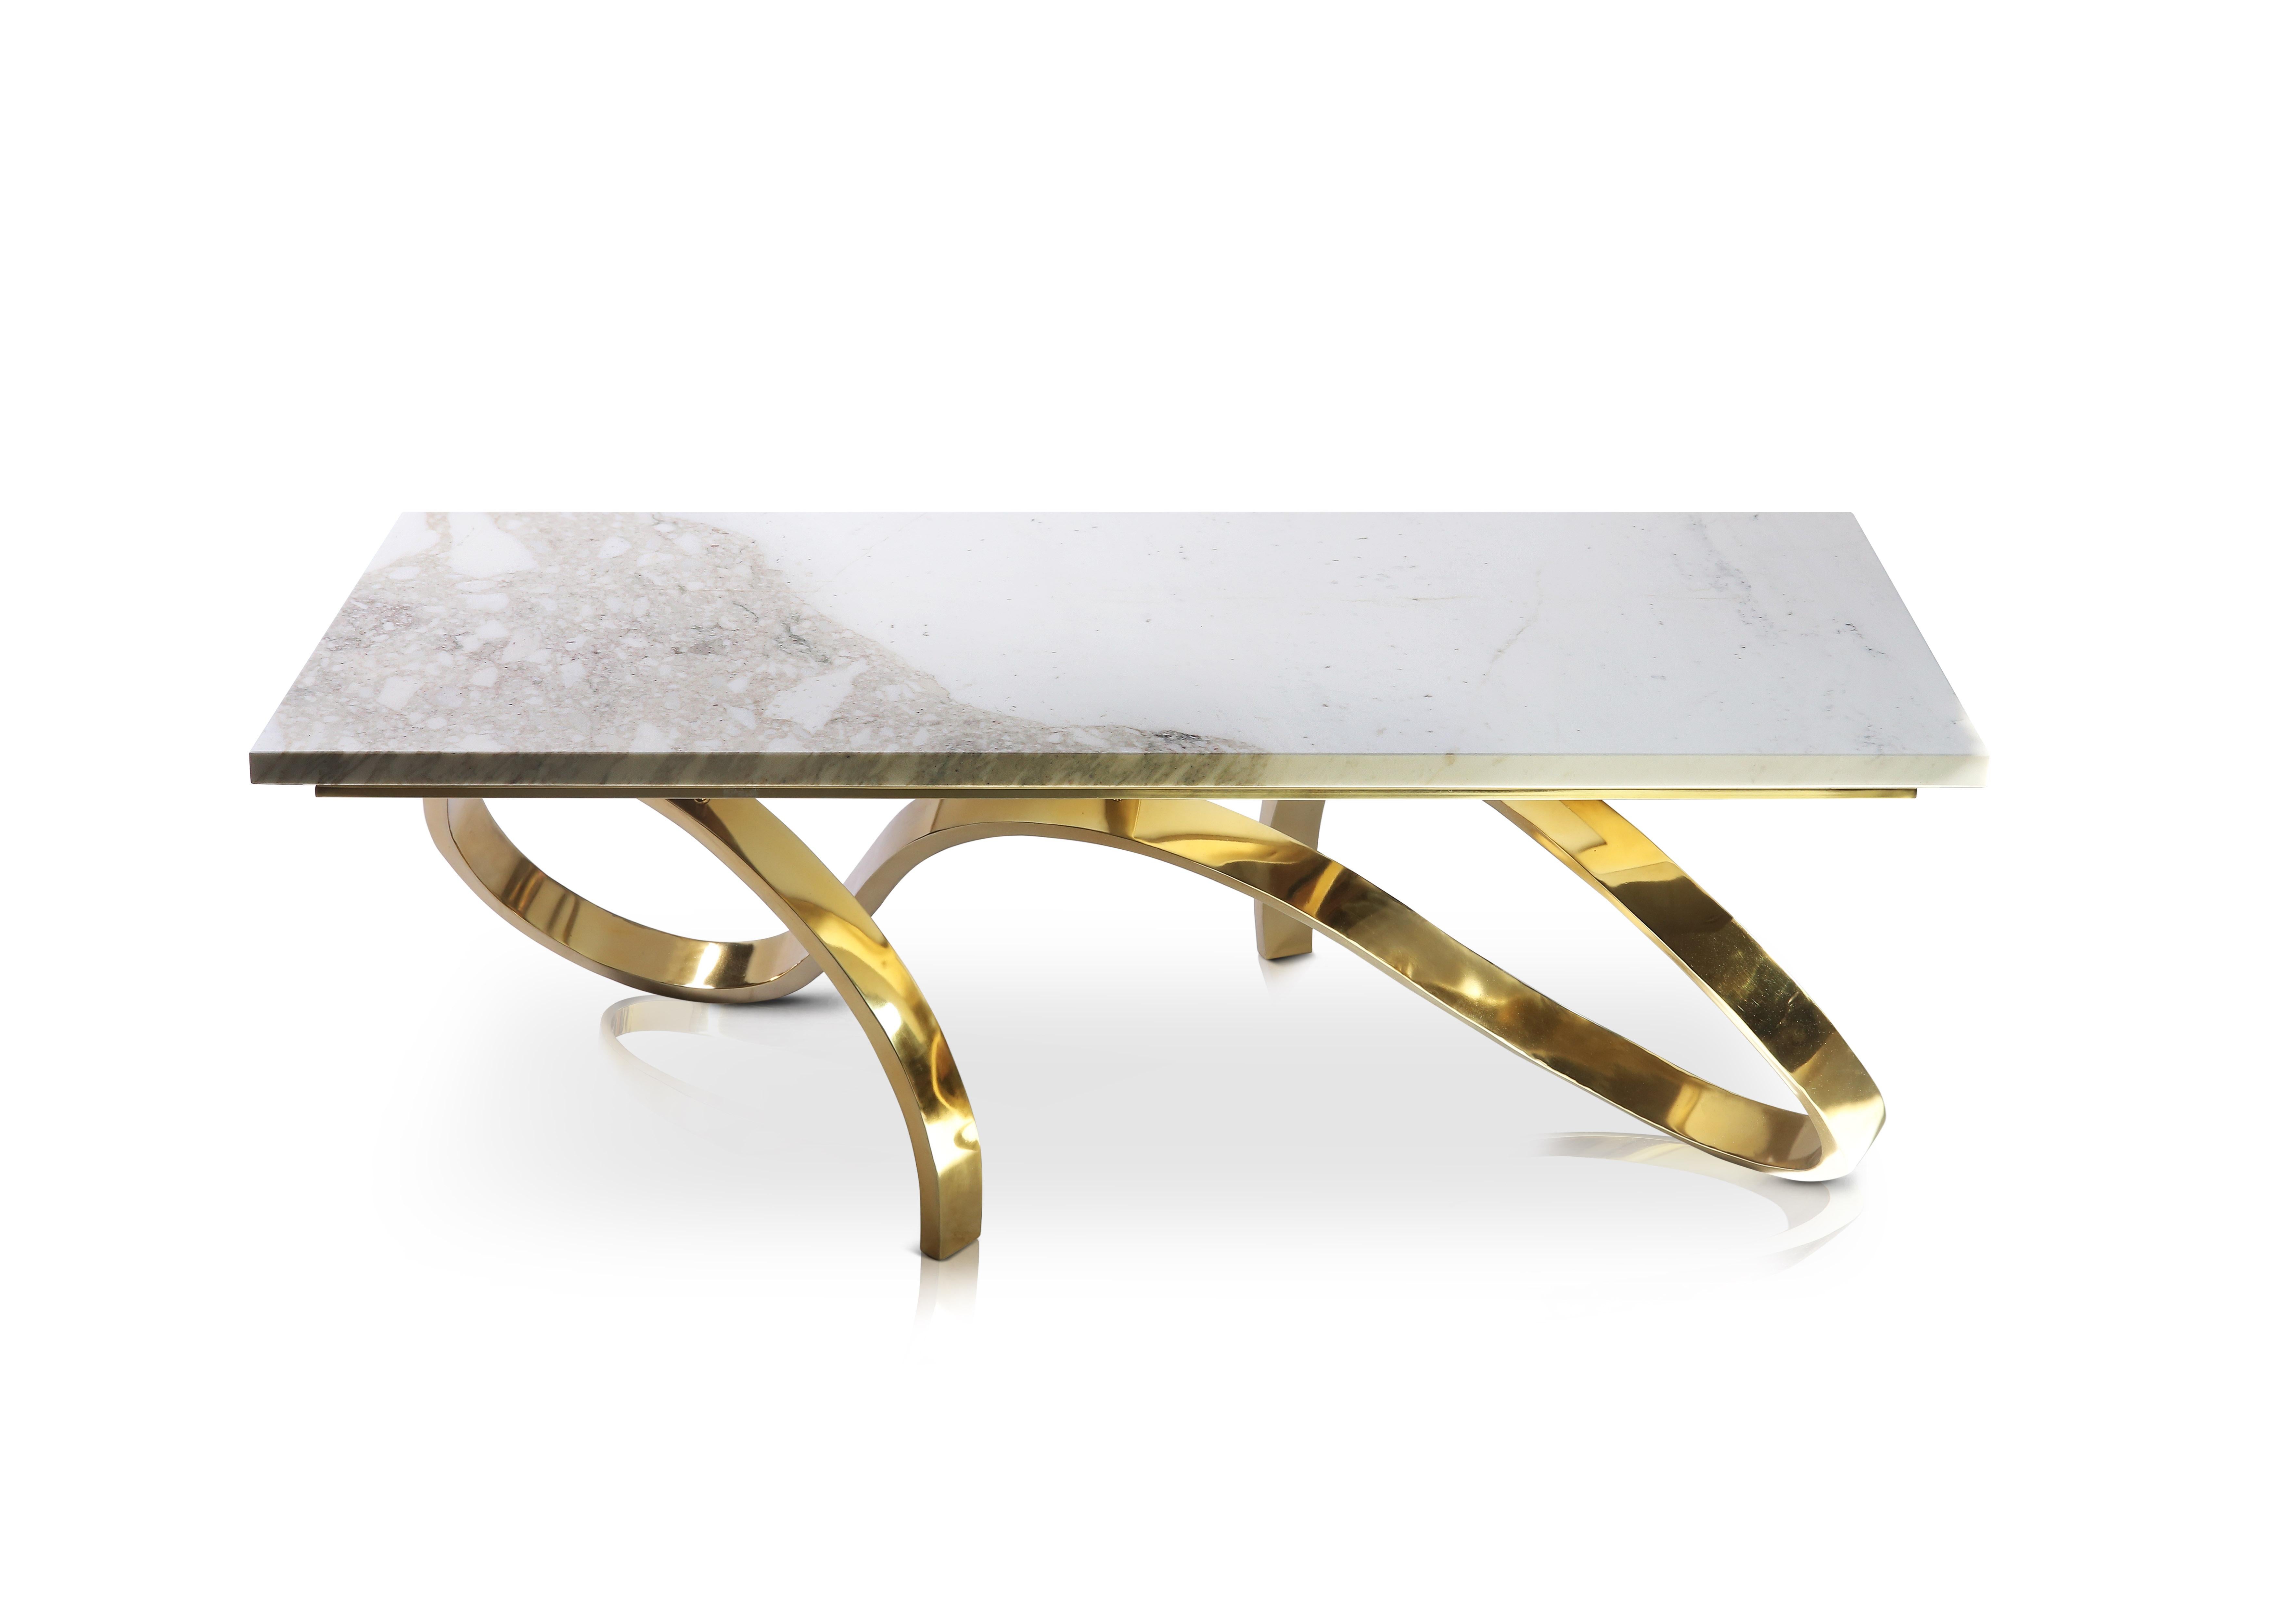 The contemporary marble and gold finish coffee table, providing a perfect modern design for any interior.
This design features a high gloss marble tabletop supported by a contrasting stainless steel base in a polished gold finish. Measures: Height